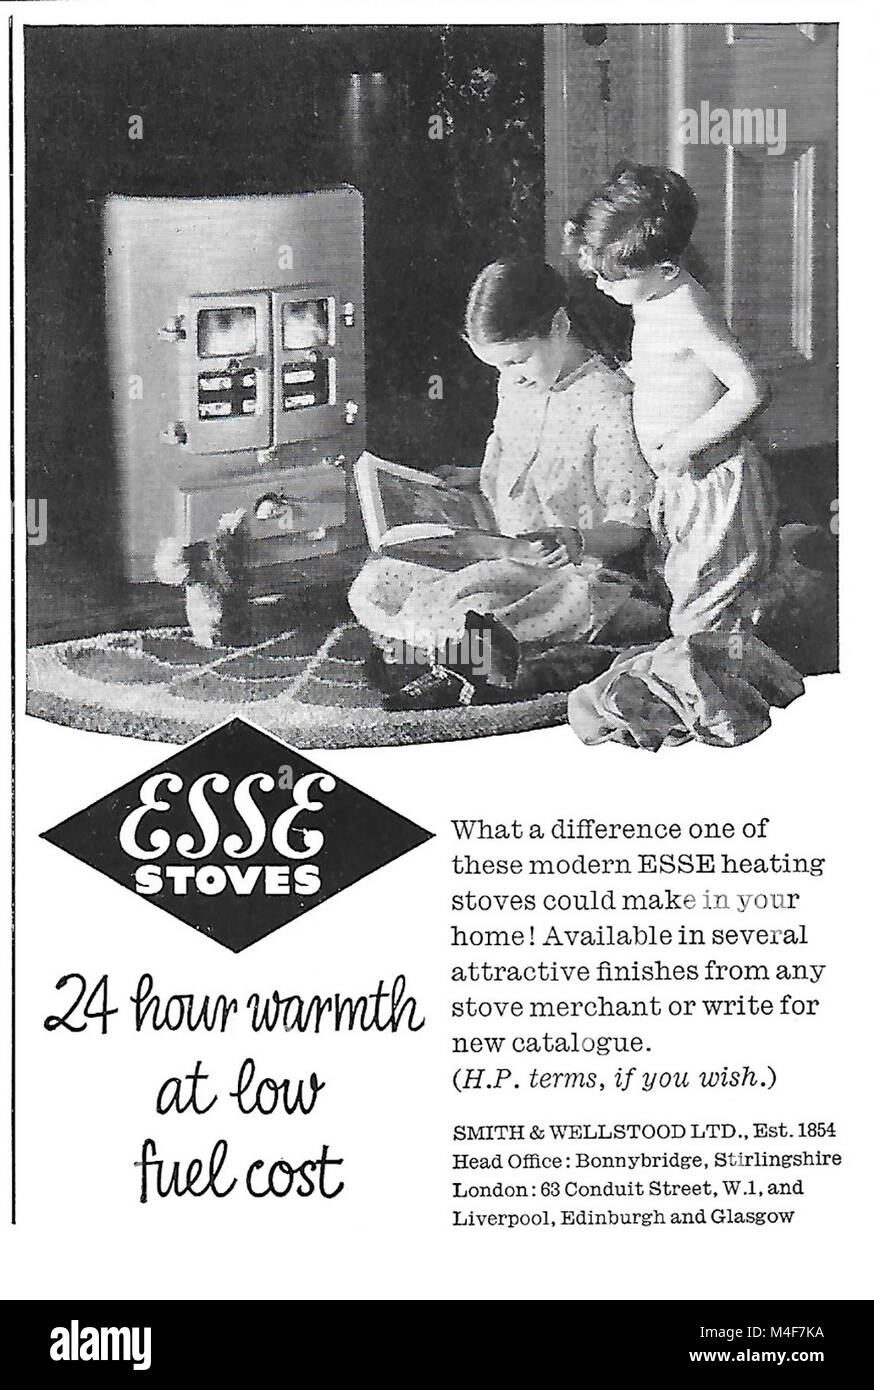 ESSE stoves home heating advert, advertising in Country Life magazine UK 1951 Stock Photo